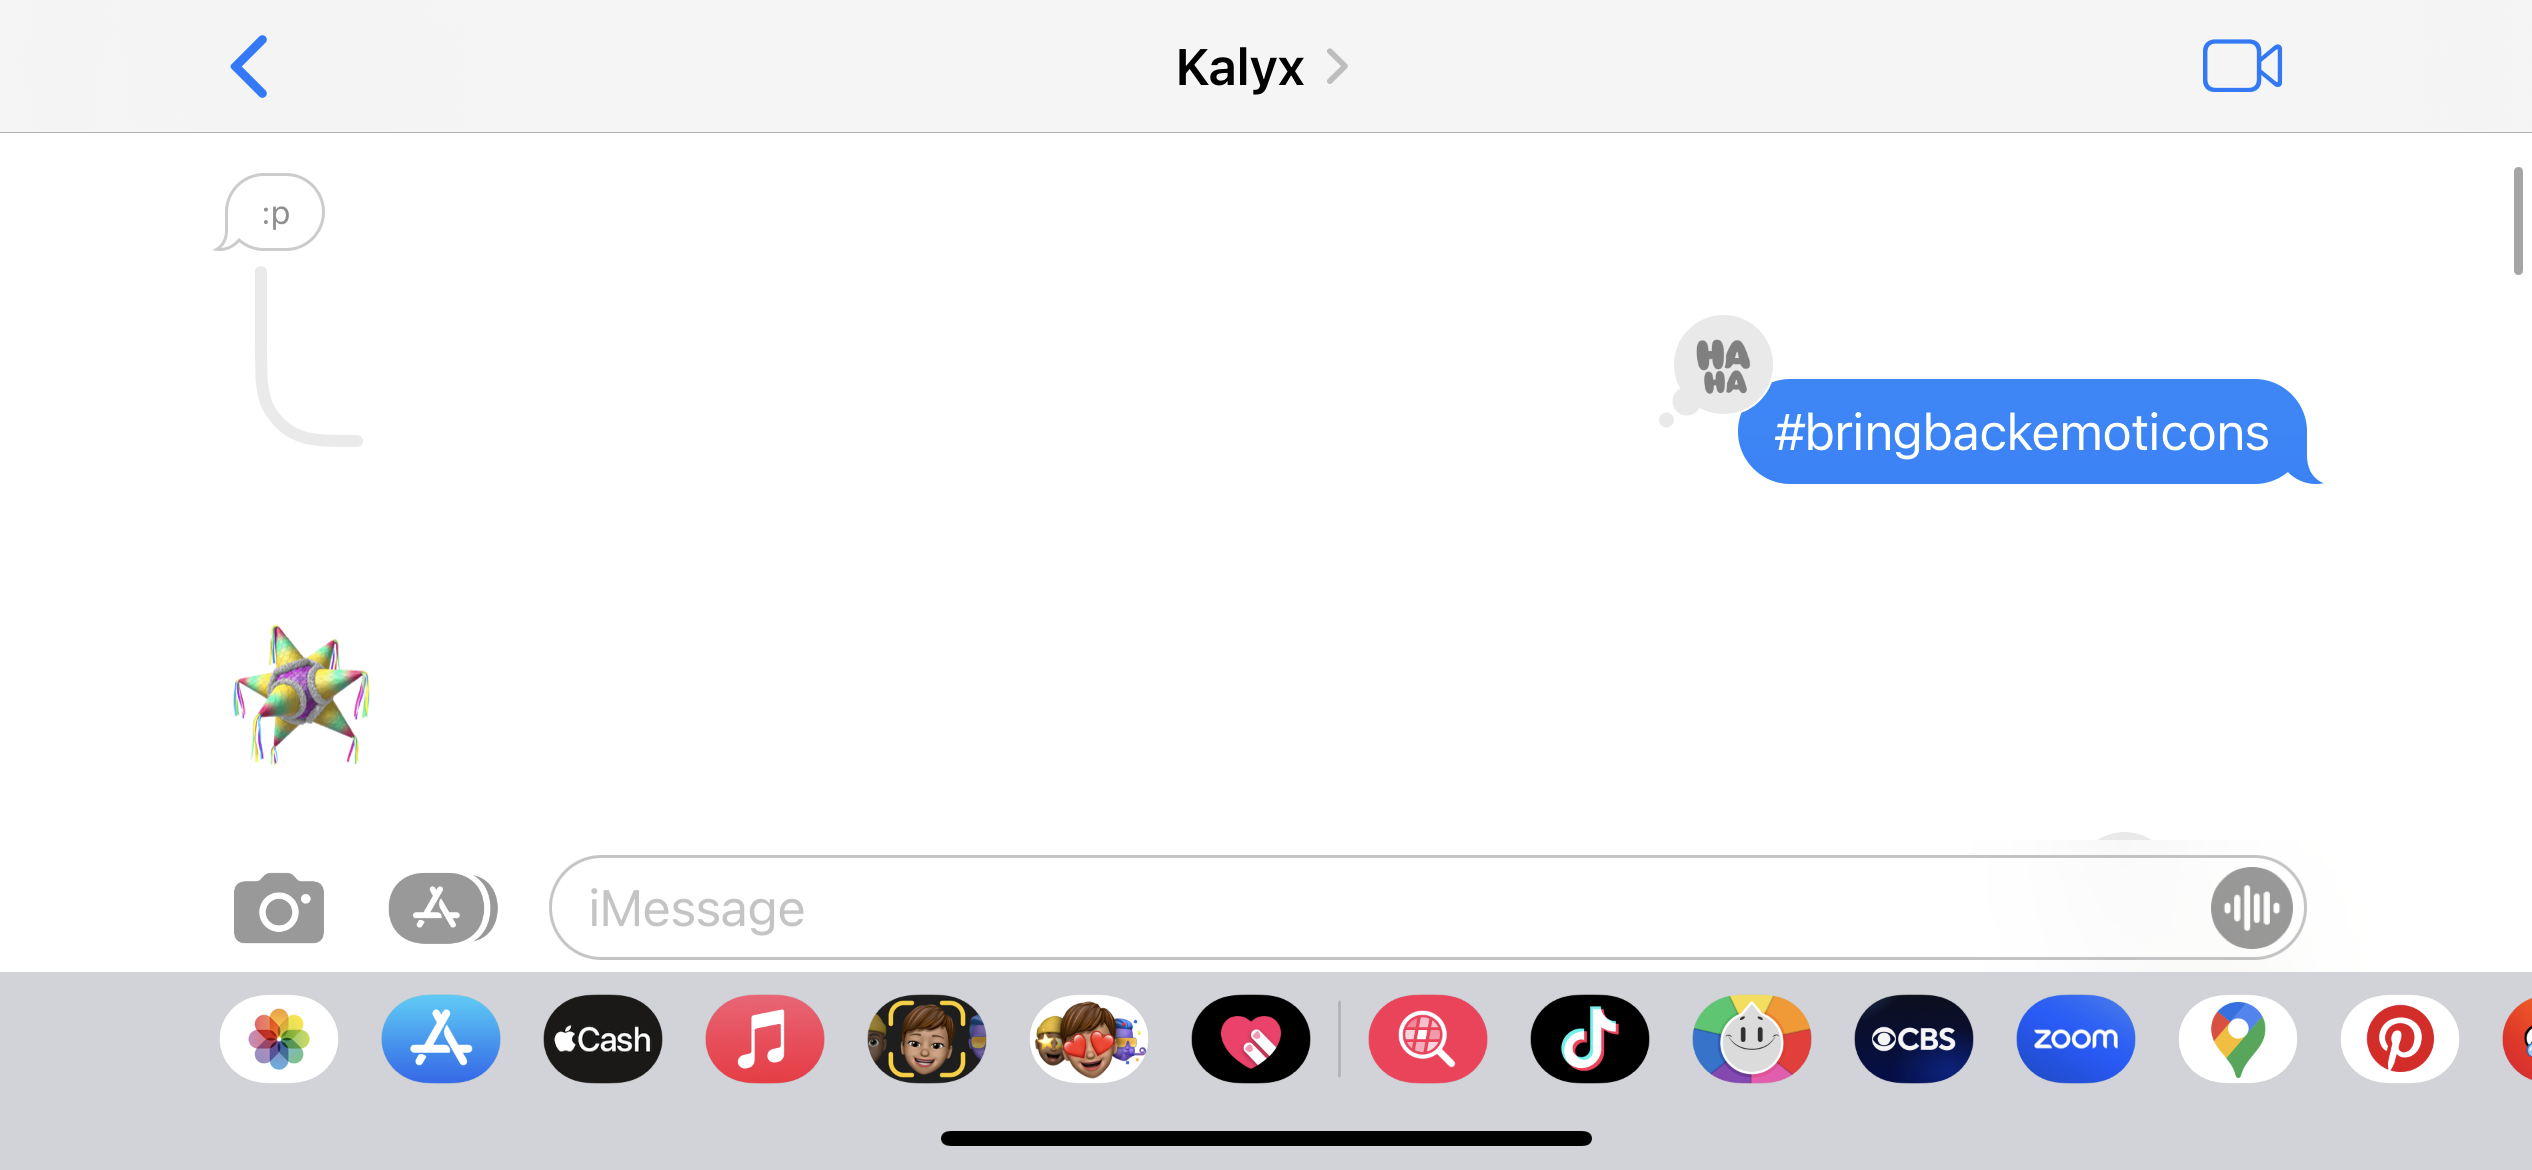 A text exchange that uses both emoticons and emojis.